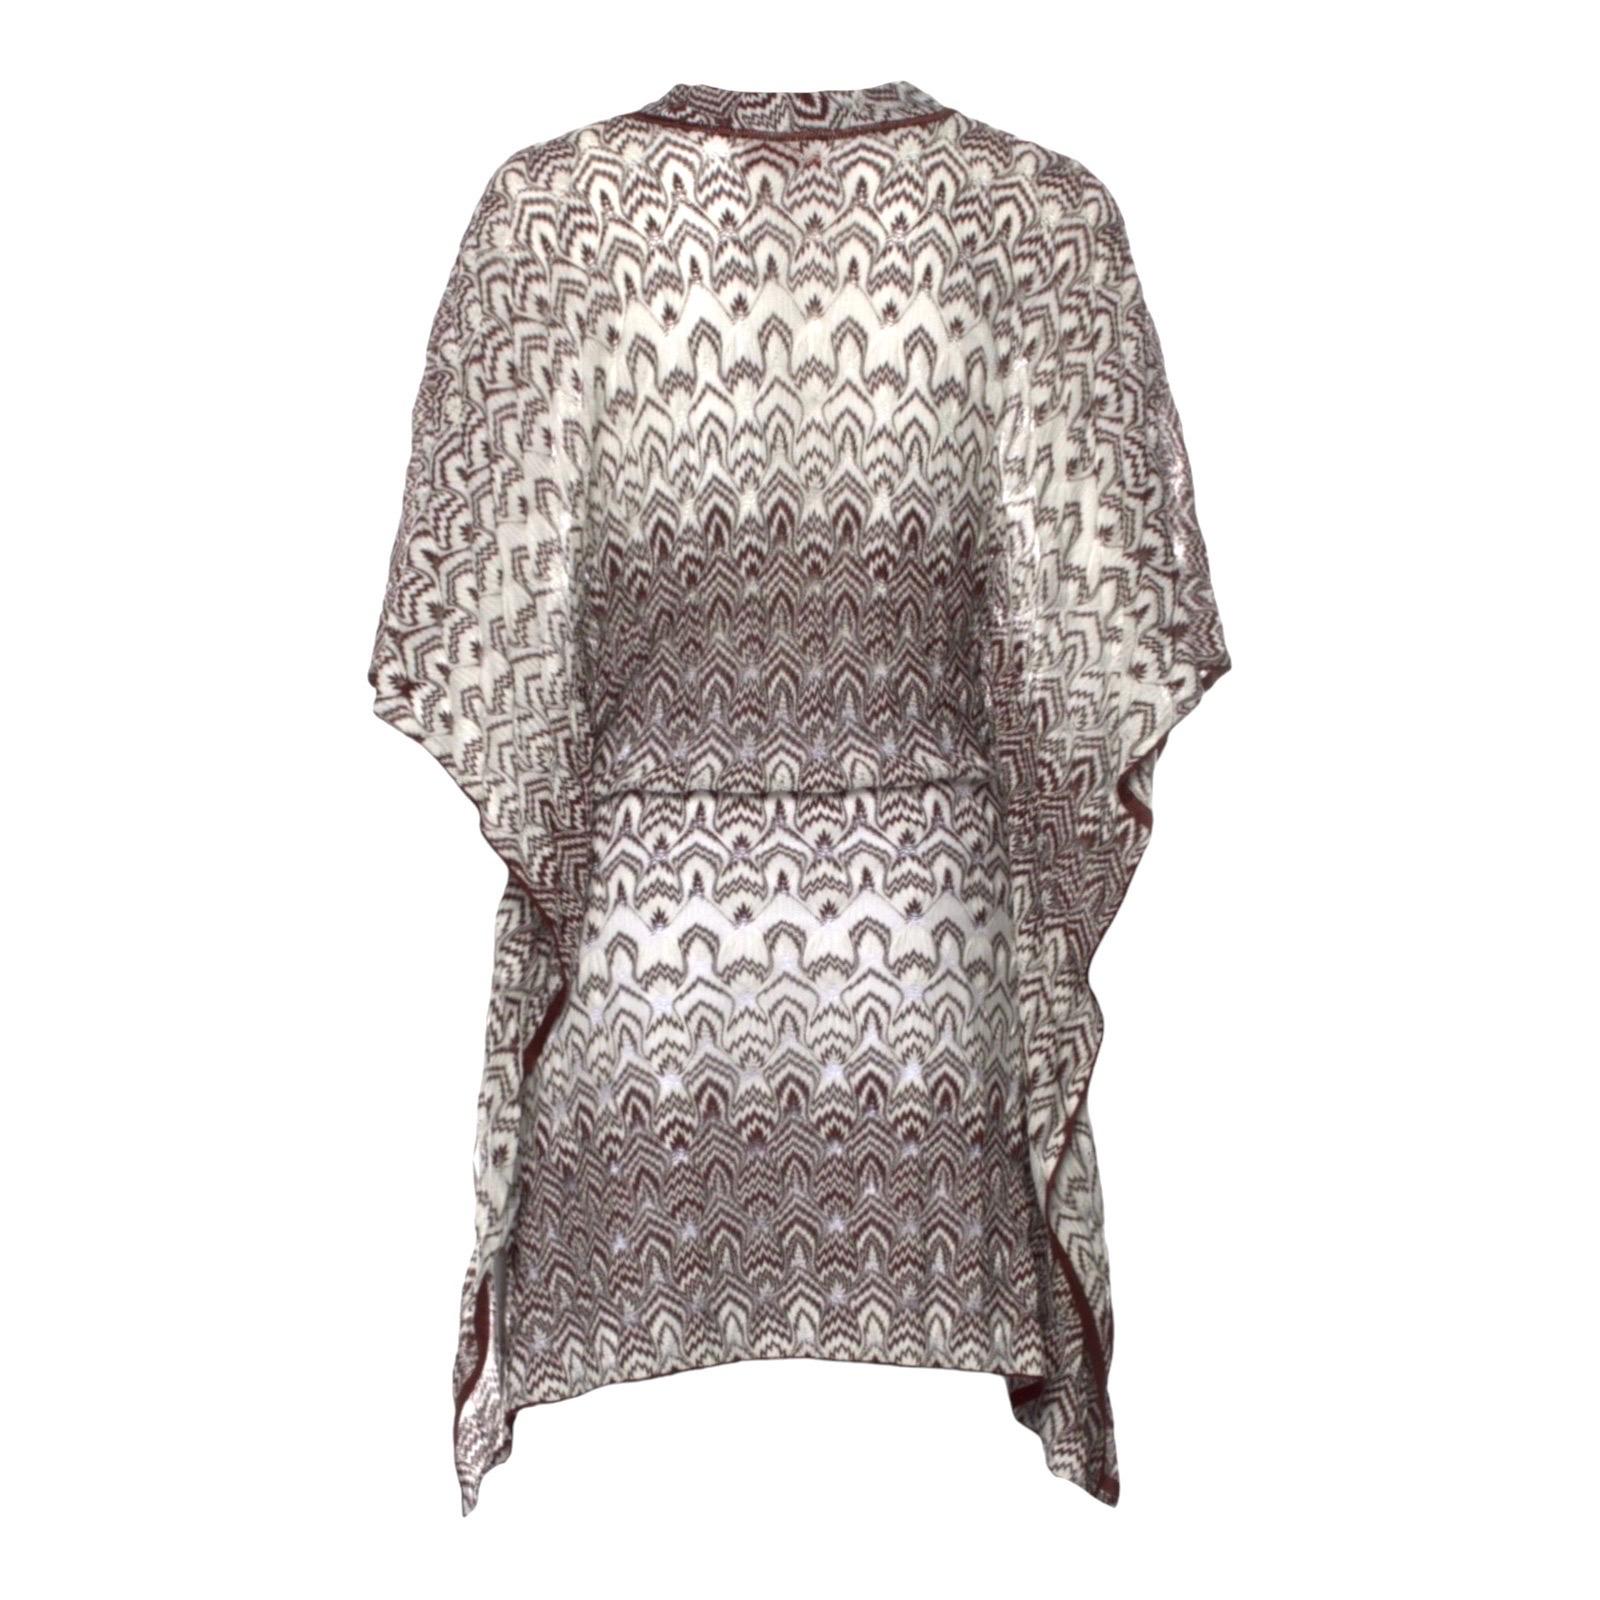 This Missoni kaftan is a '70s-inspired poolside piece. Team this classic crochet knit kaftan with a bikini for a beautifully bold vacation look.

A signature Missoni knit caftan is the only coverup you'll need for the resort season!

Signature